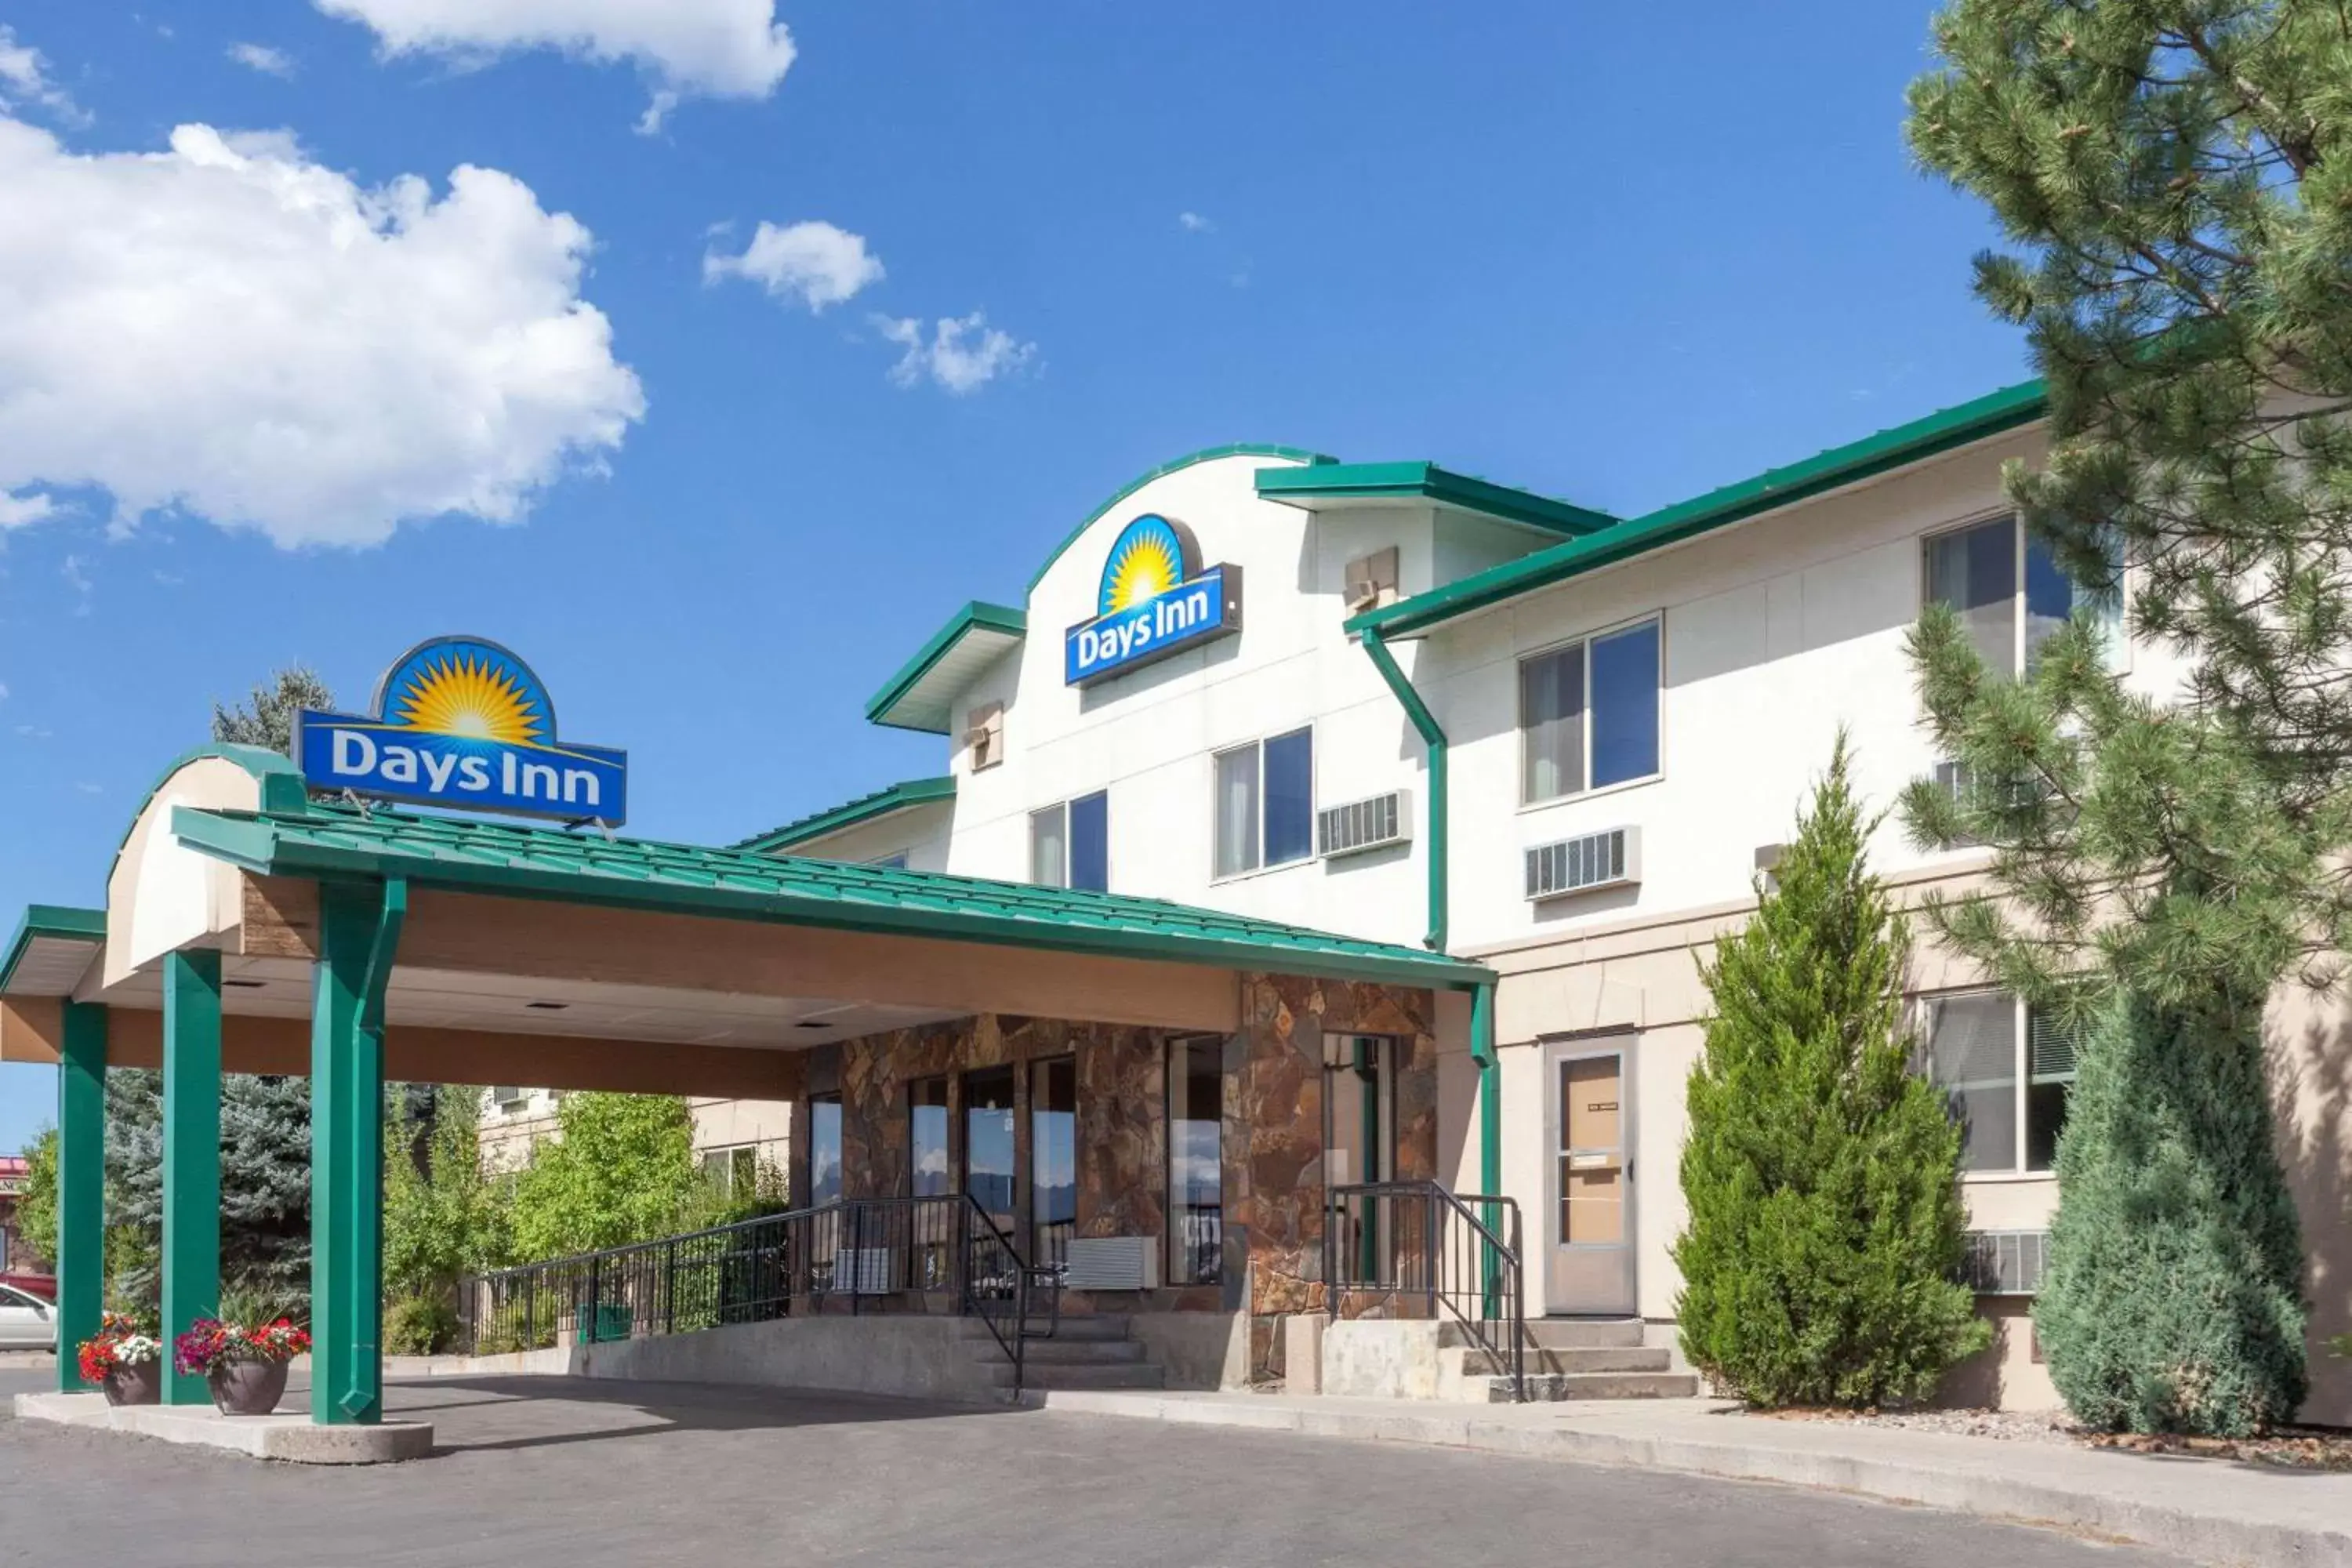 Property building in Days Inn by Wyndham Missoula Airport